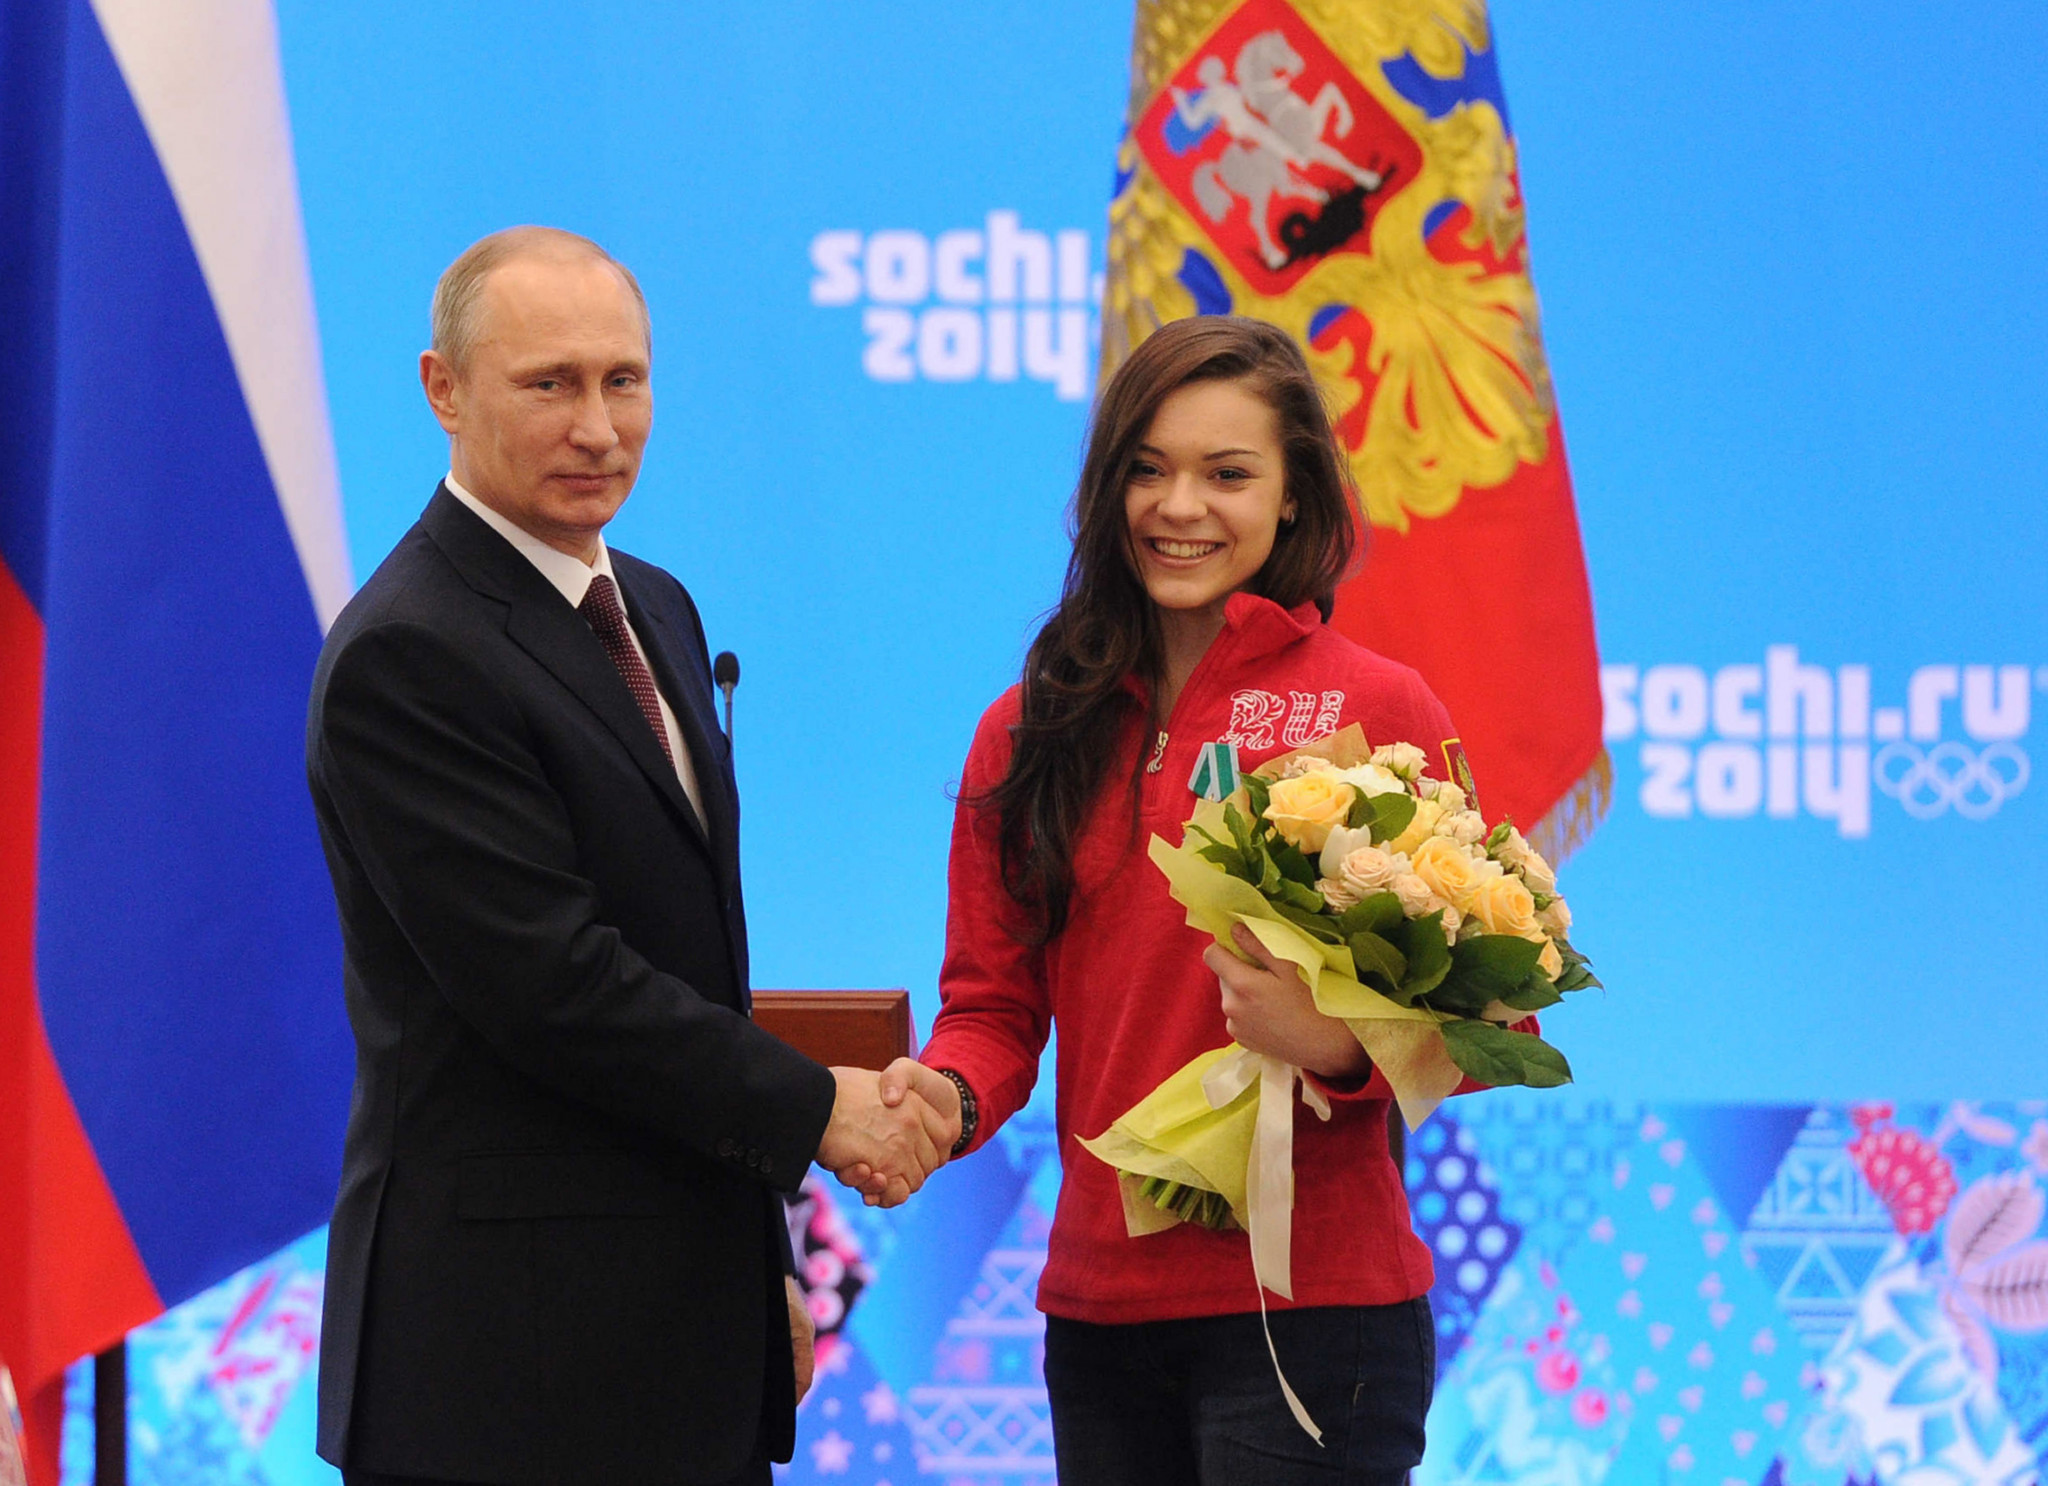 Adelina Sotnikova is congratulated by Russian President Vladimir Putin after her Sochi 2014 success ©Getty Images